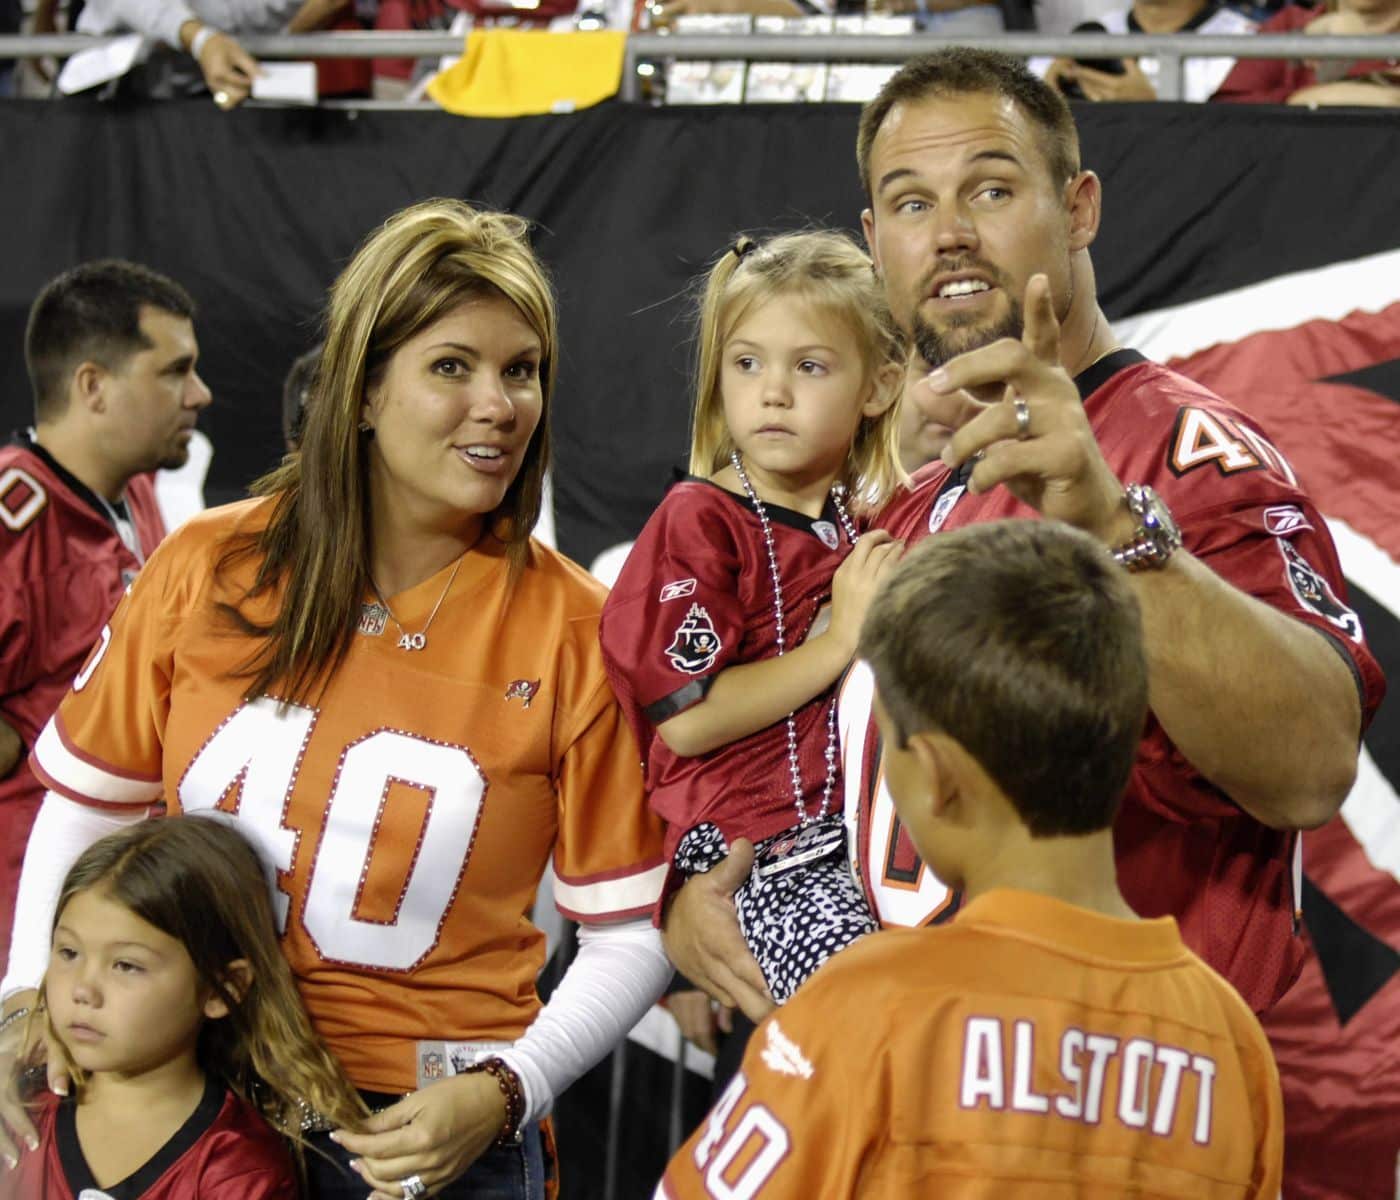 Mike Alstott and wife Nicole